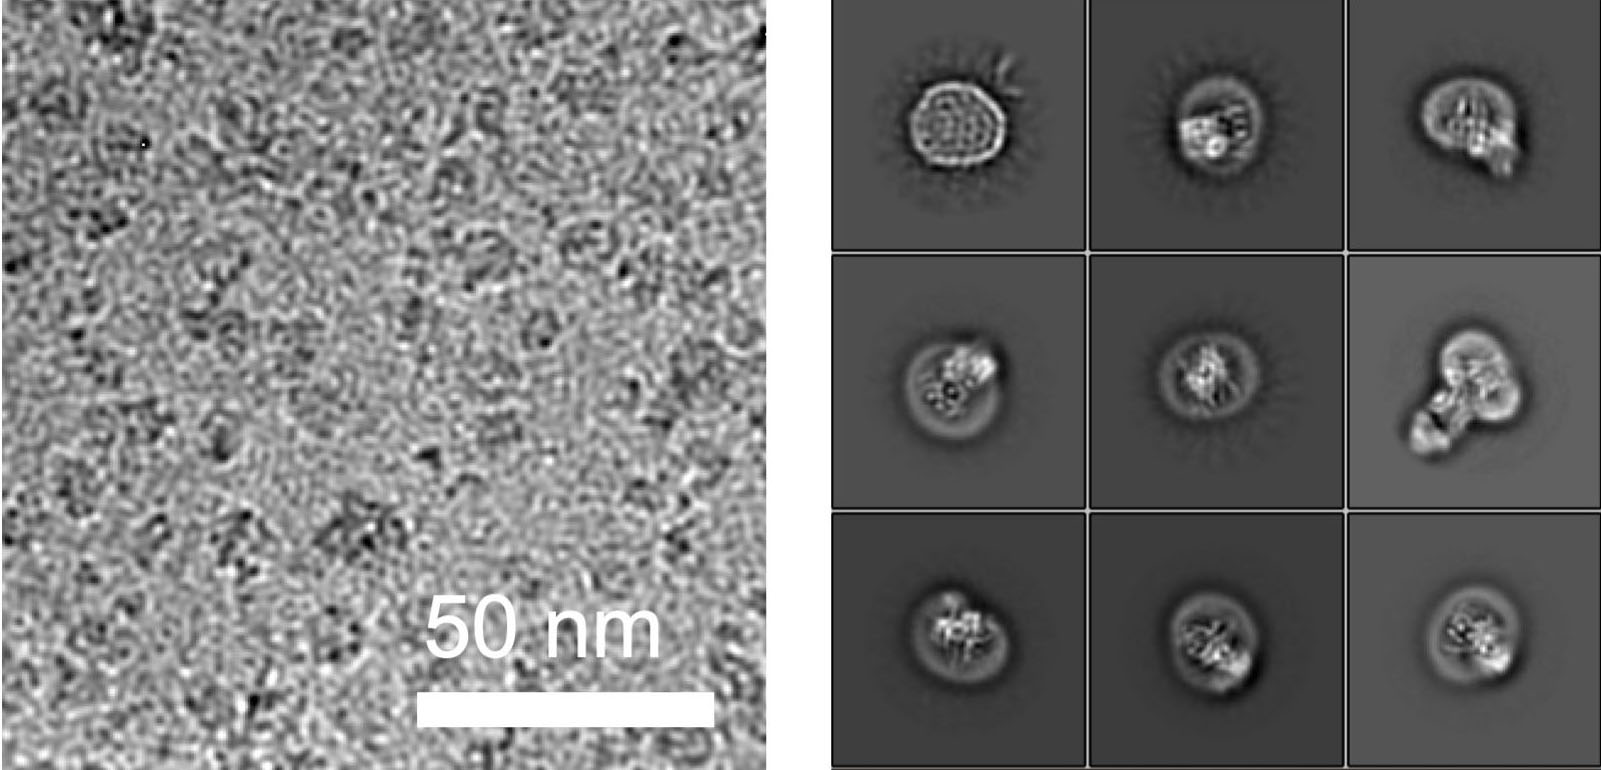 Left: Representative cryo-EM image of ALG6-Fab particles. Right: 2D classes of thousands of averaged ALG6 Fab particles. (Photograph: Joël S. Bloch / ETH Zurich)